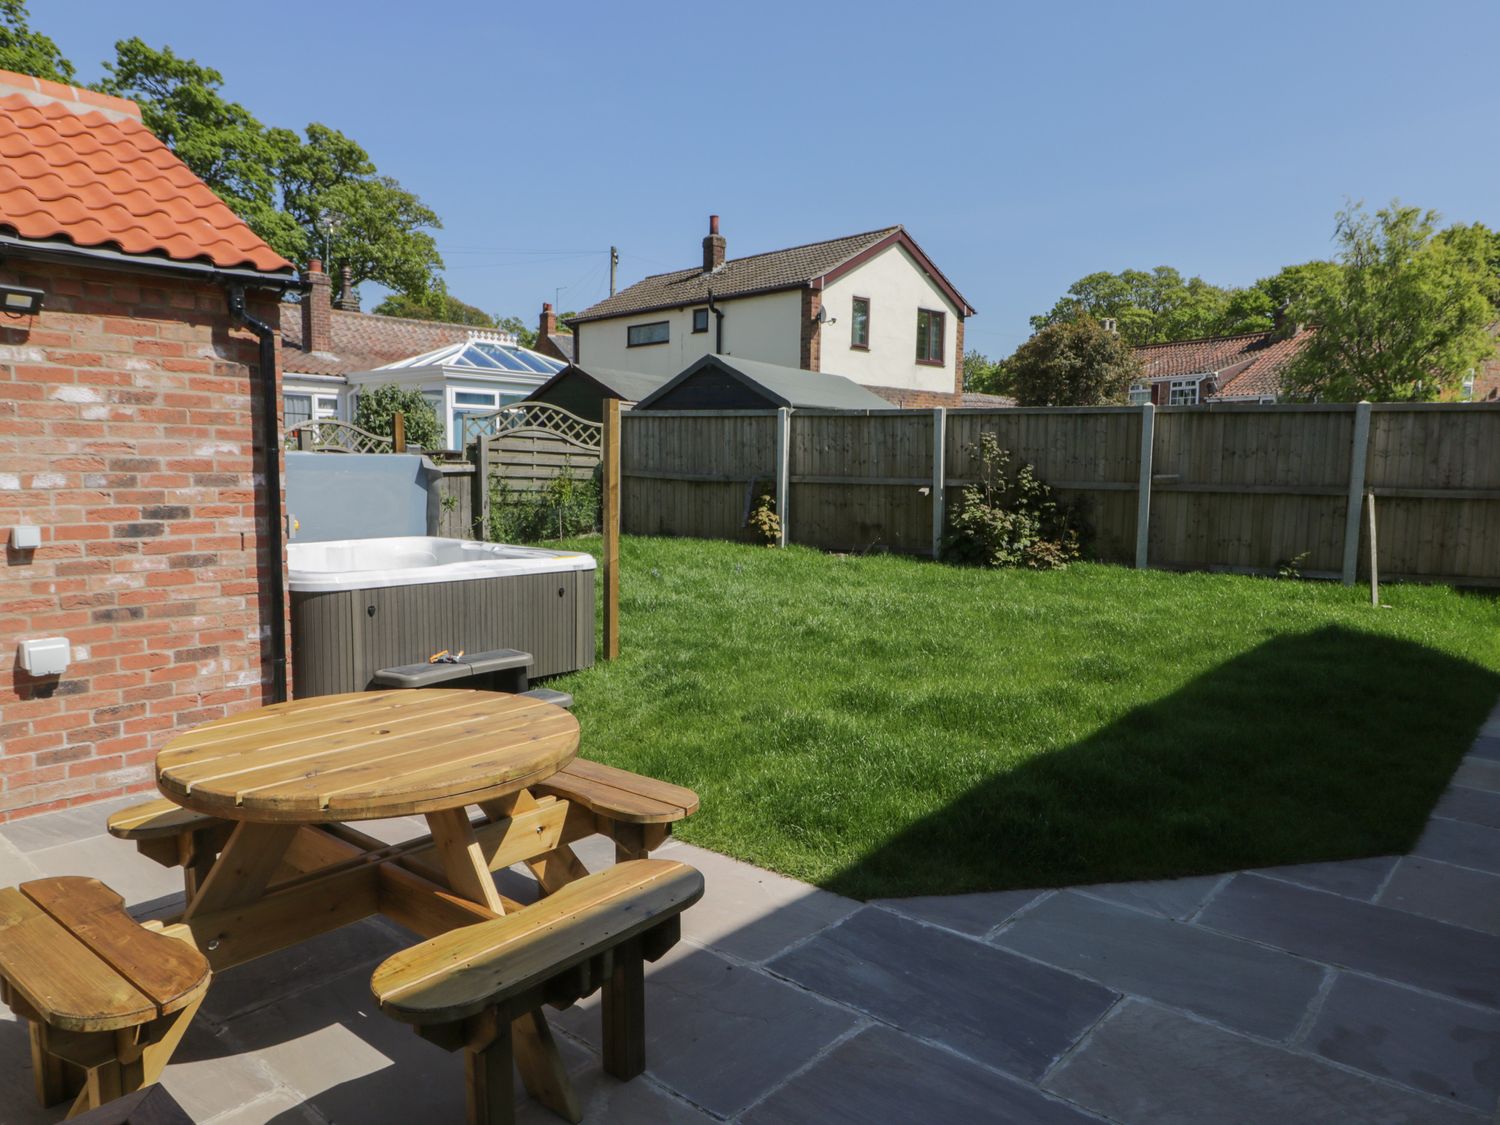 Cherry Tree Cottage, Atwick near Hornsea, East Riding of Yorkshire. Near a National Park. WiFi. Dogs